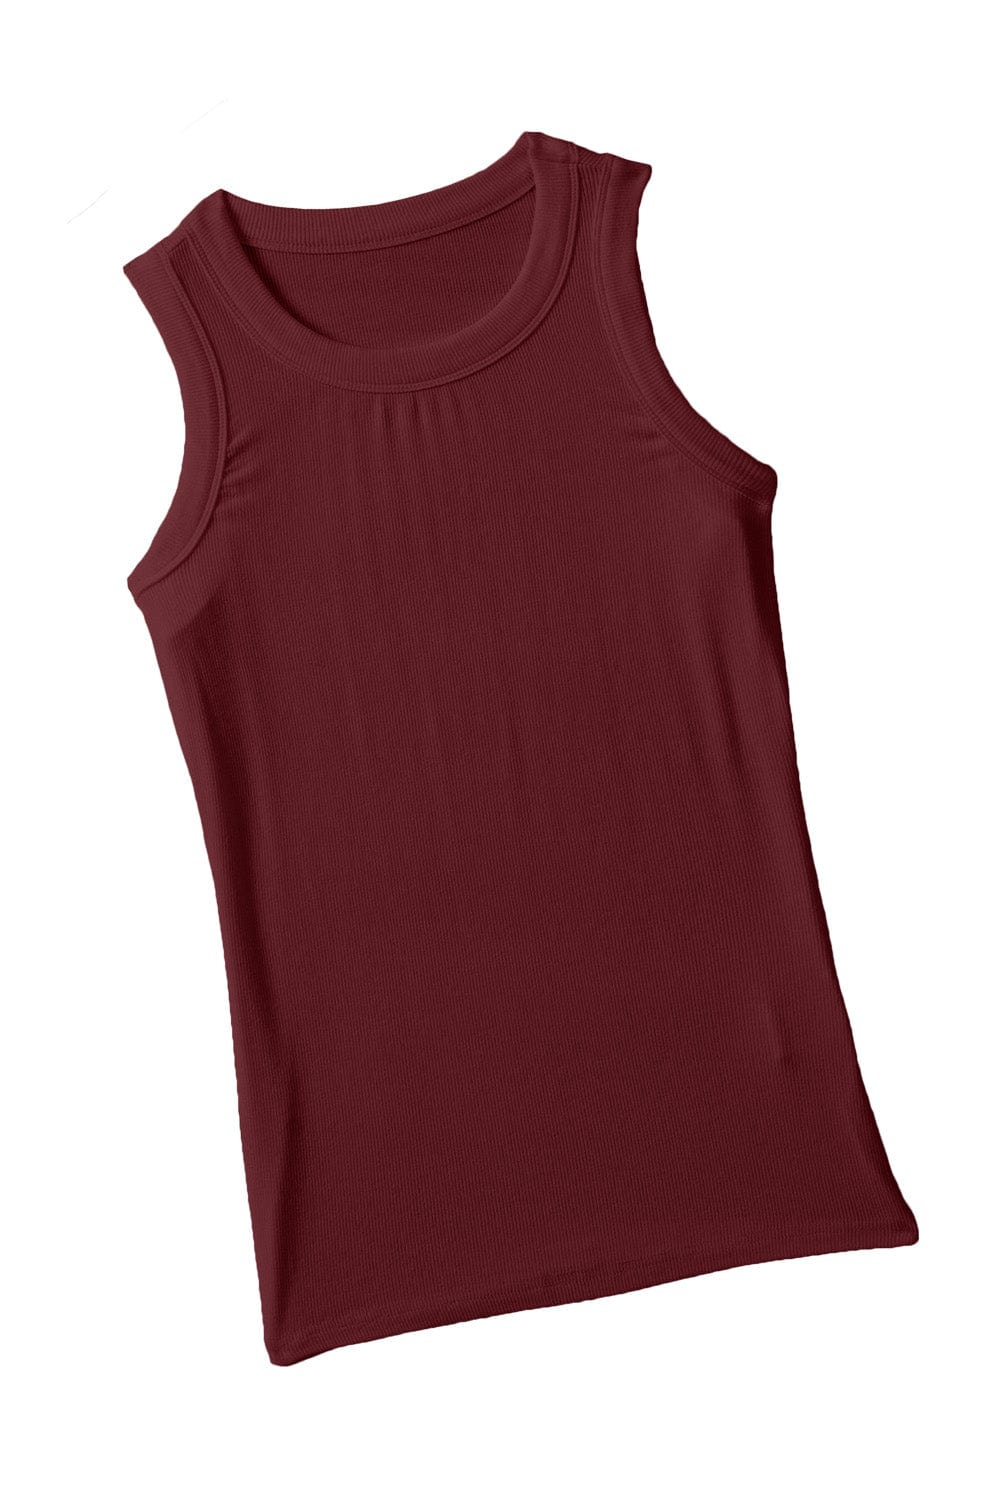 Solid Color Basic Ribbed Knit Slim Fit Tank Top - CLASSY CLOSET BOUTIQUE